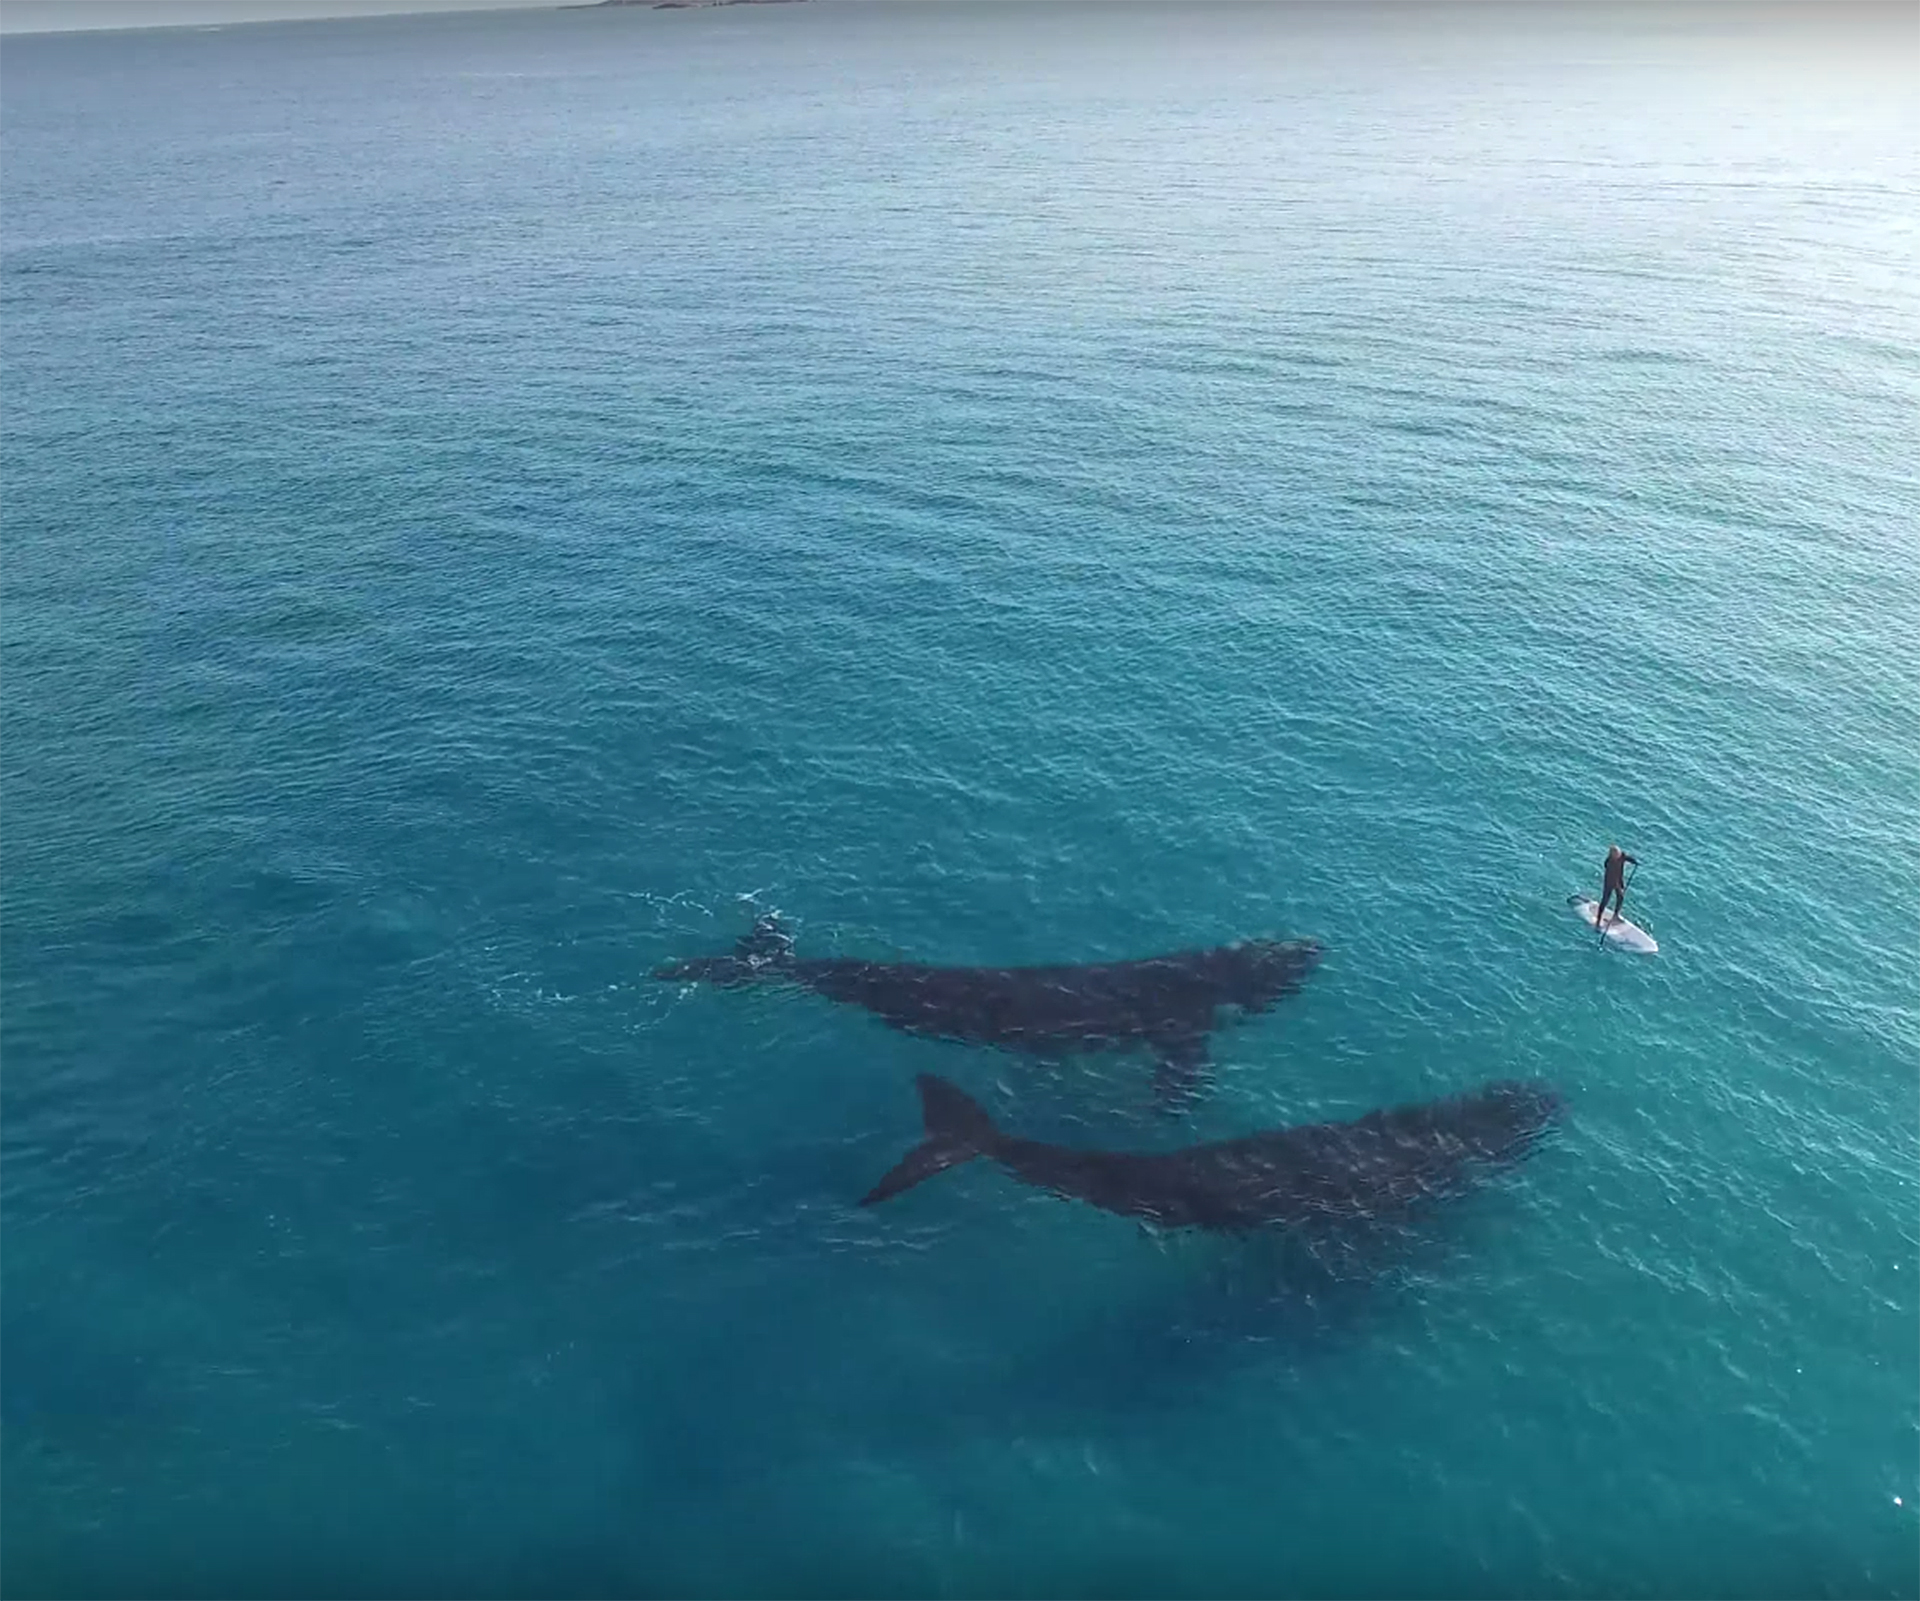 Drone captures magical moment whales swim up to paddle boarder